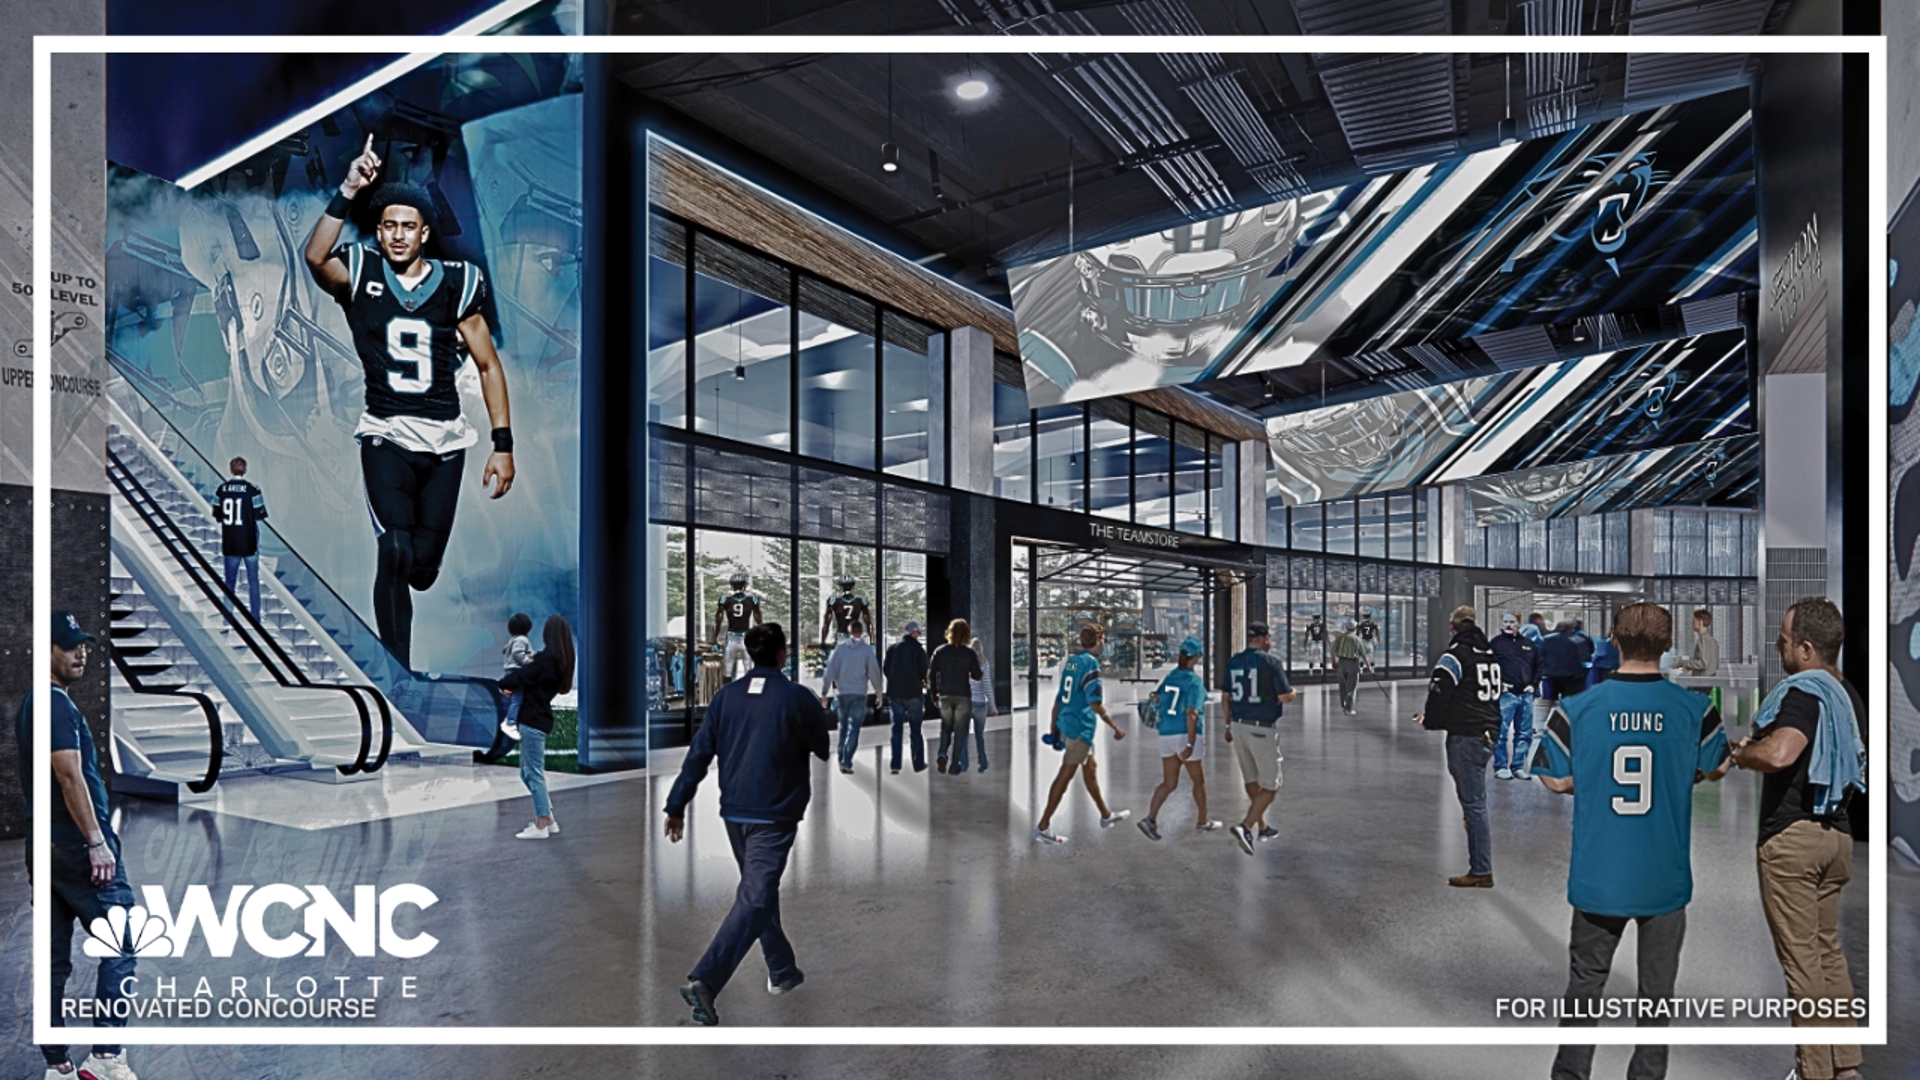 The renovation includes new seats, improved accessibility to the stadium, improved lighting and a reimagined pavilion that can be used as a community gathering spot.